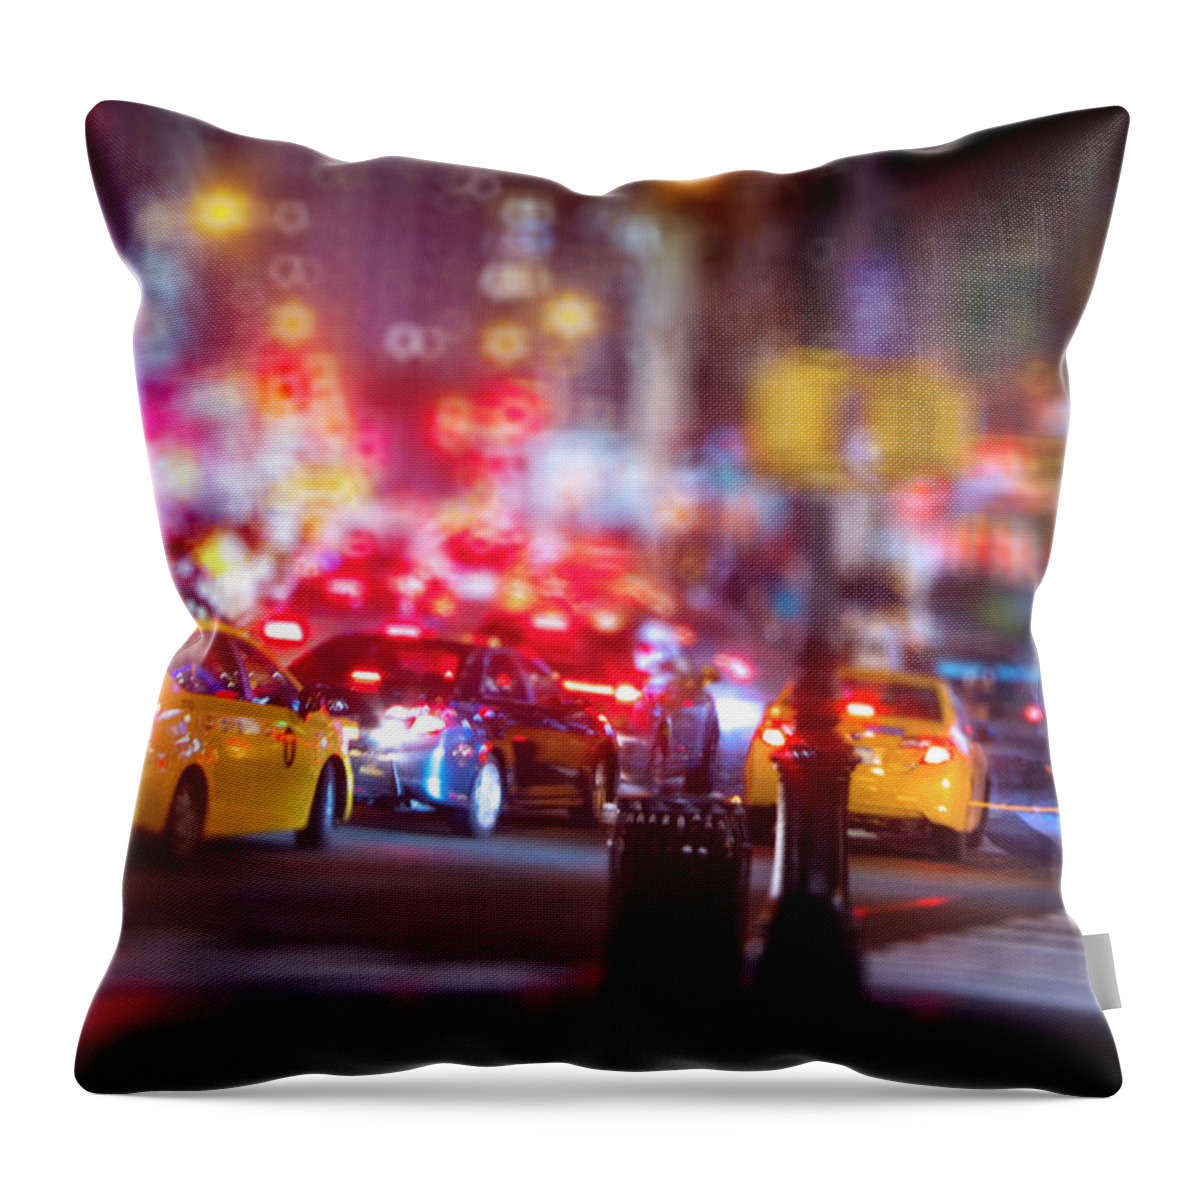 New York City Throw Pillow featuring the photograph New York City Traffic by Mark Andrew Thomas